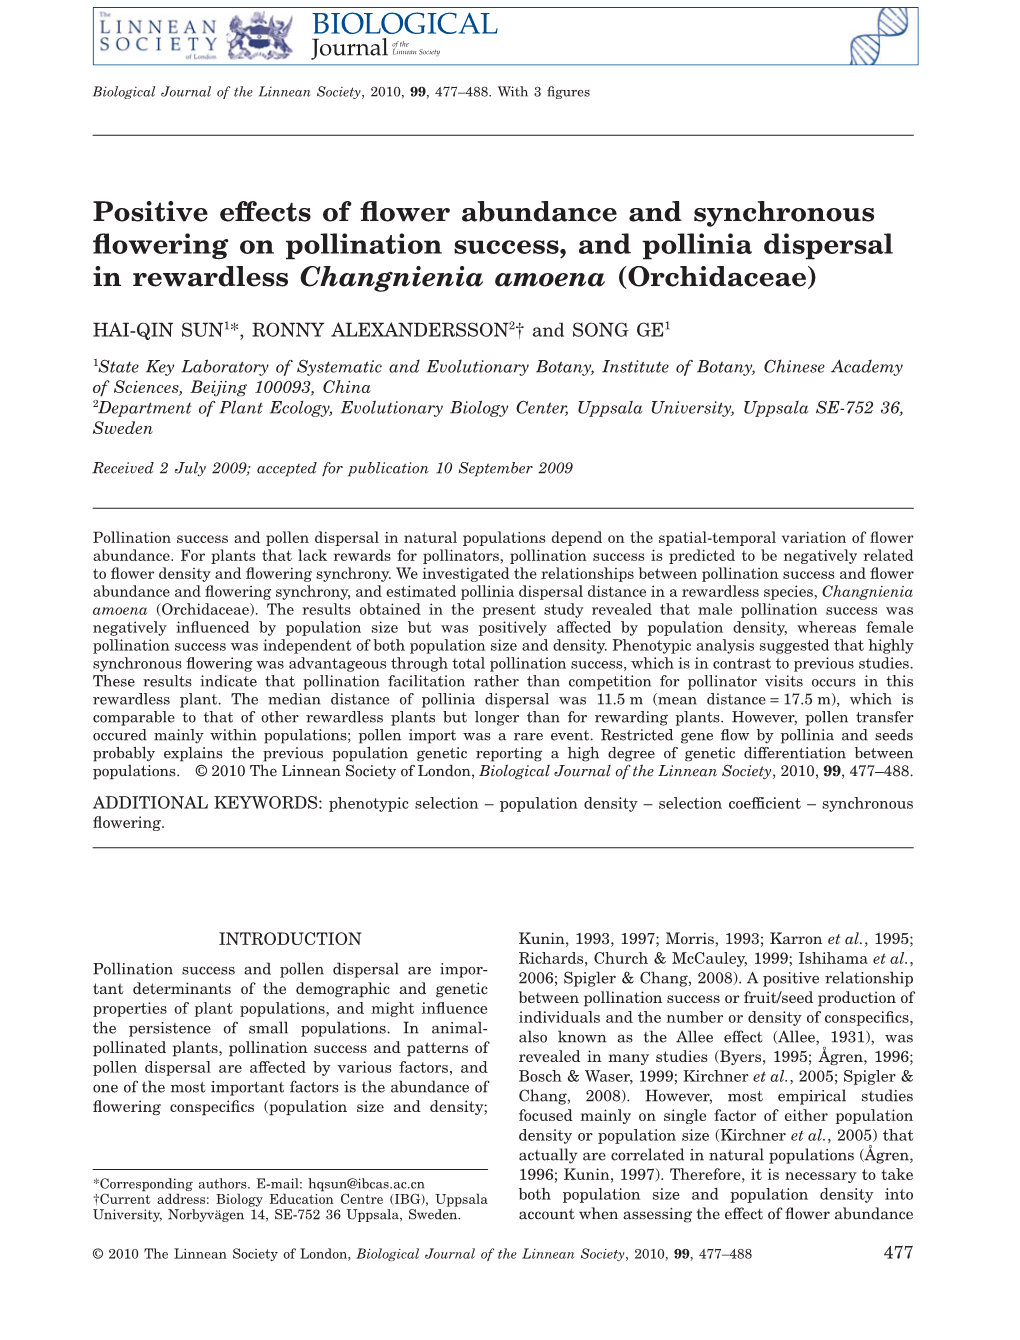 Positive Effects of Flower Abundance and Synchronous Flowering On